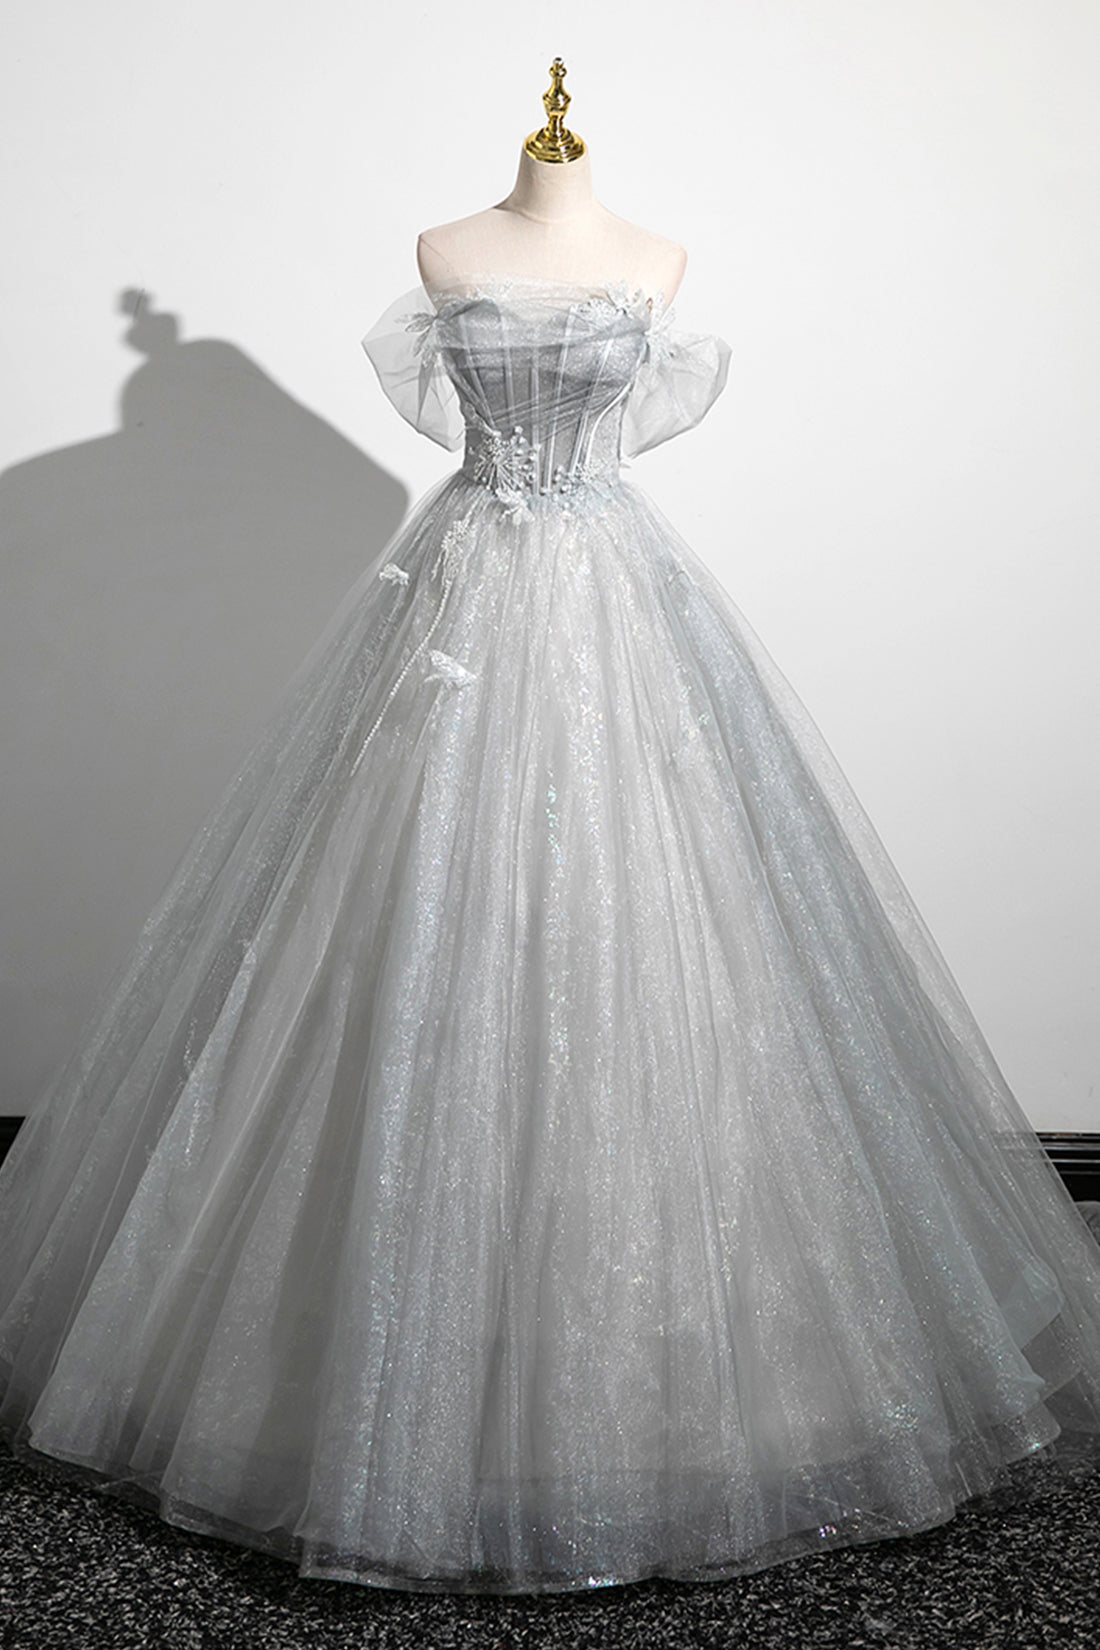 Tiana | Gray A-Line Off the Shoulder Tulle Prom Dress, Lovely Corset Floor Length Party Dress